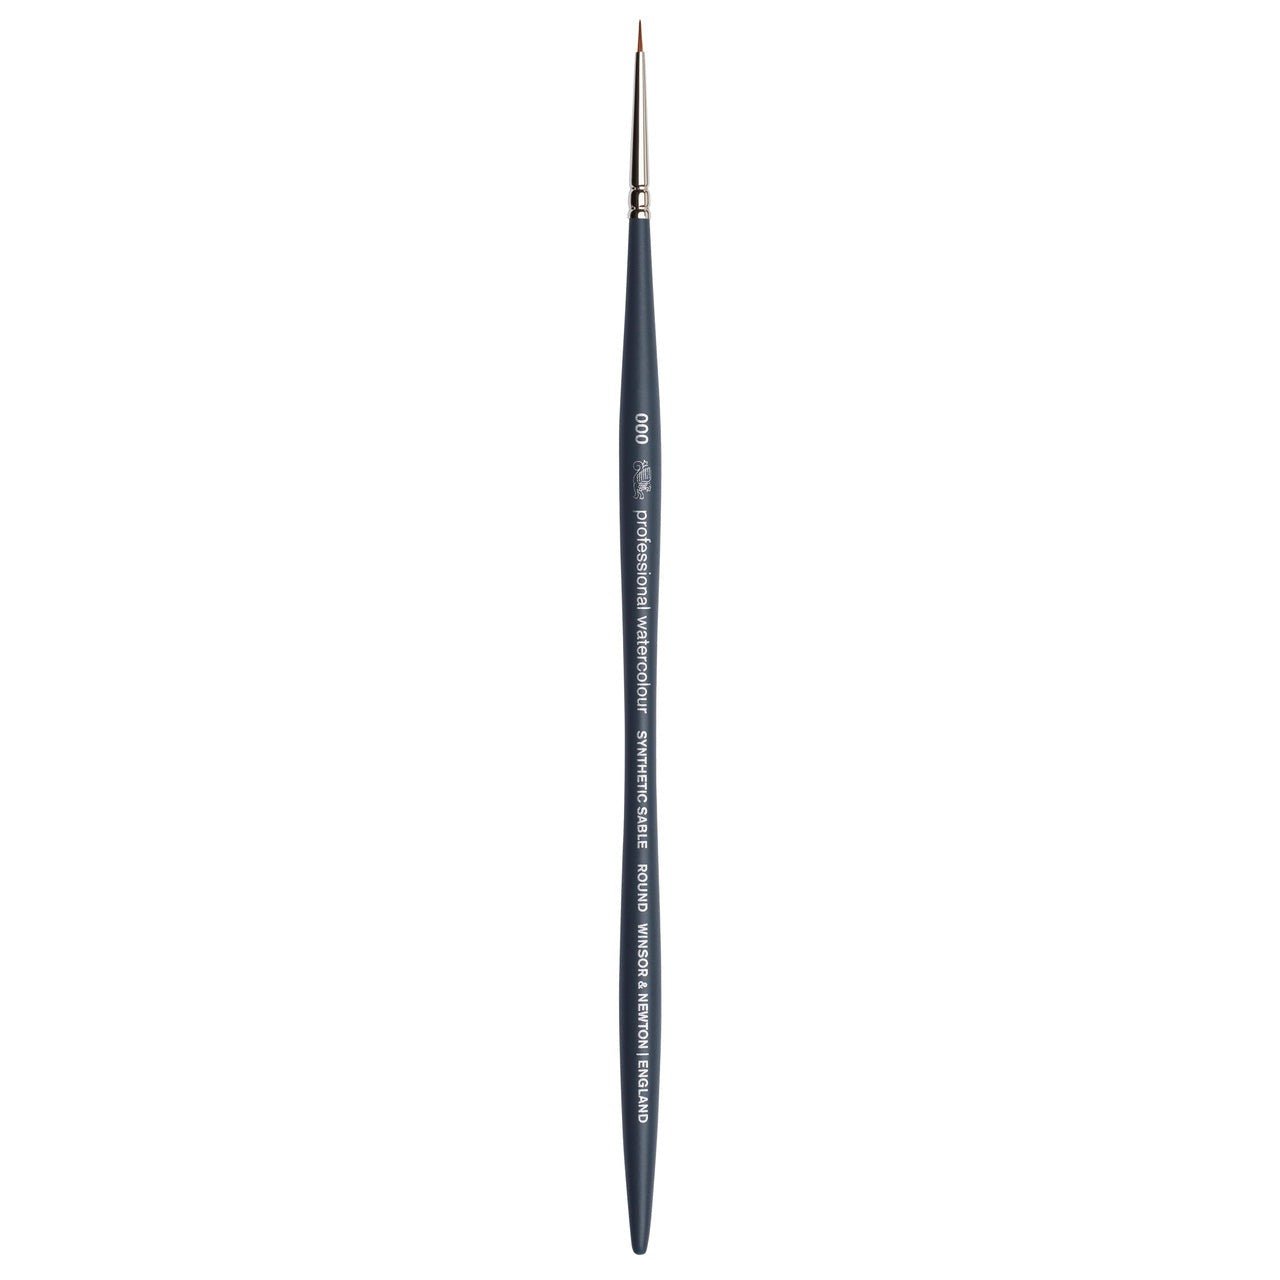 Winsor & Newton Professional Watercolor Synthetic Sable Brush - Round 000 - merriartist.com